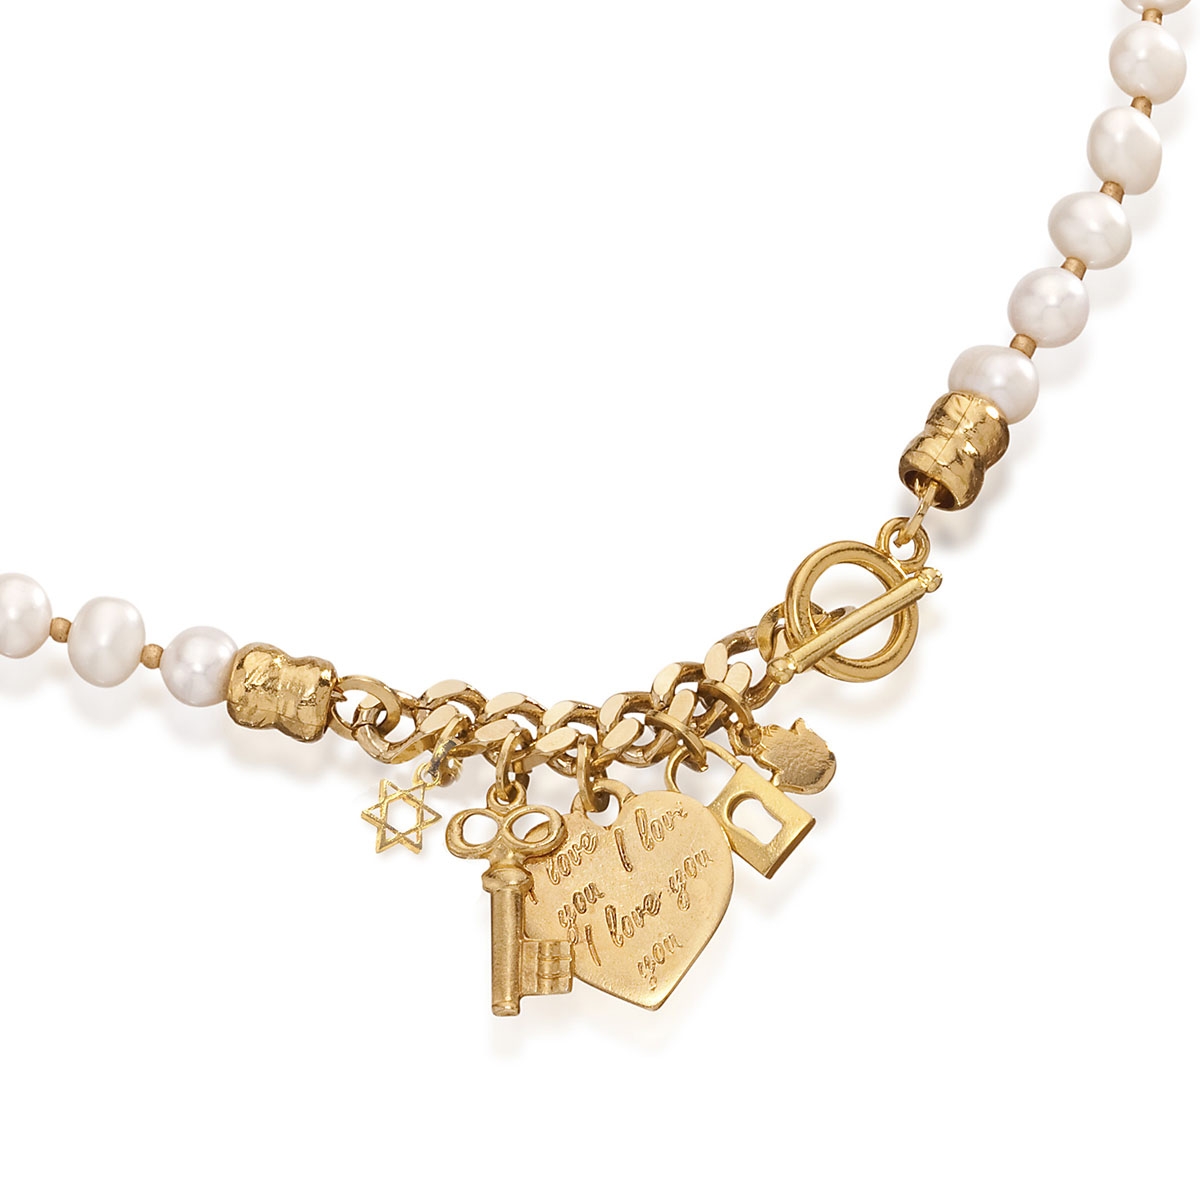 SEA Smadar Eliasaf Pearls and Gold-Plated Elements Necklace  - 1